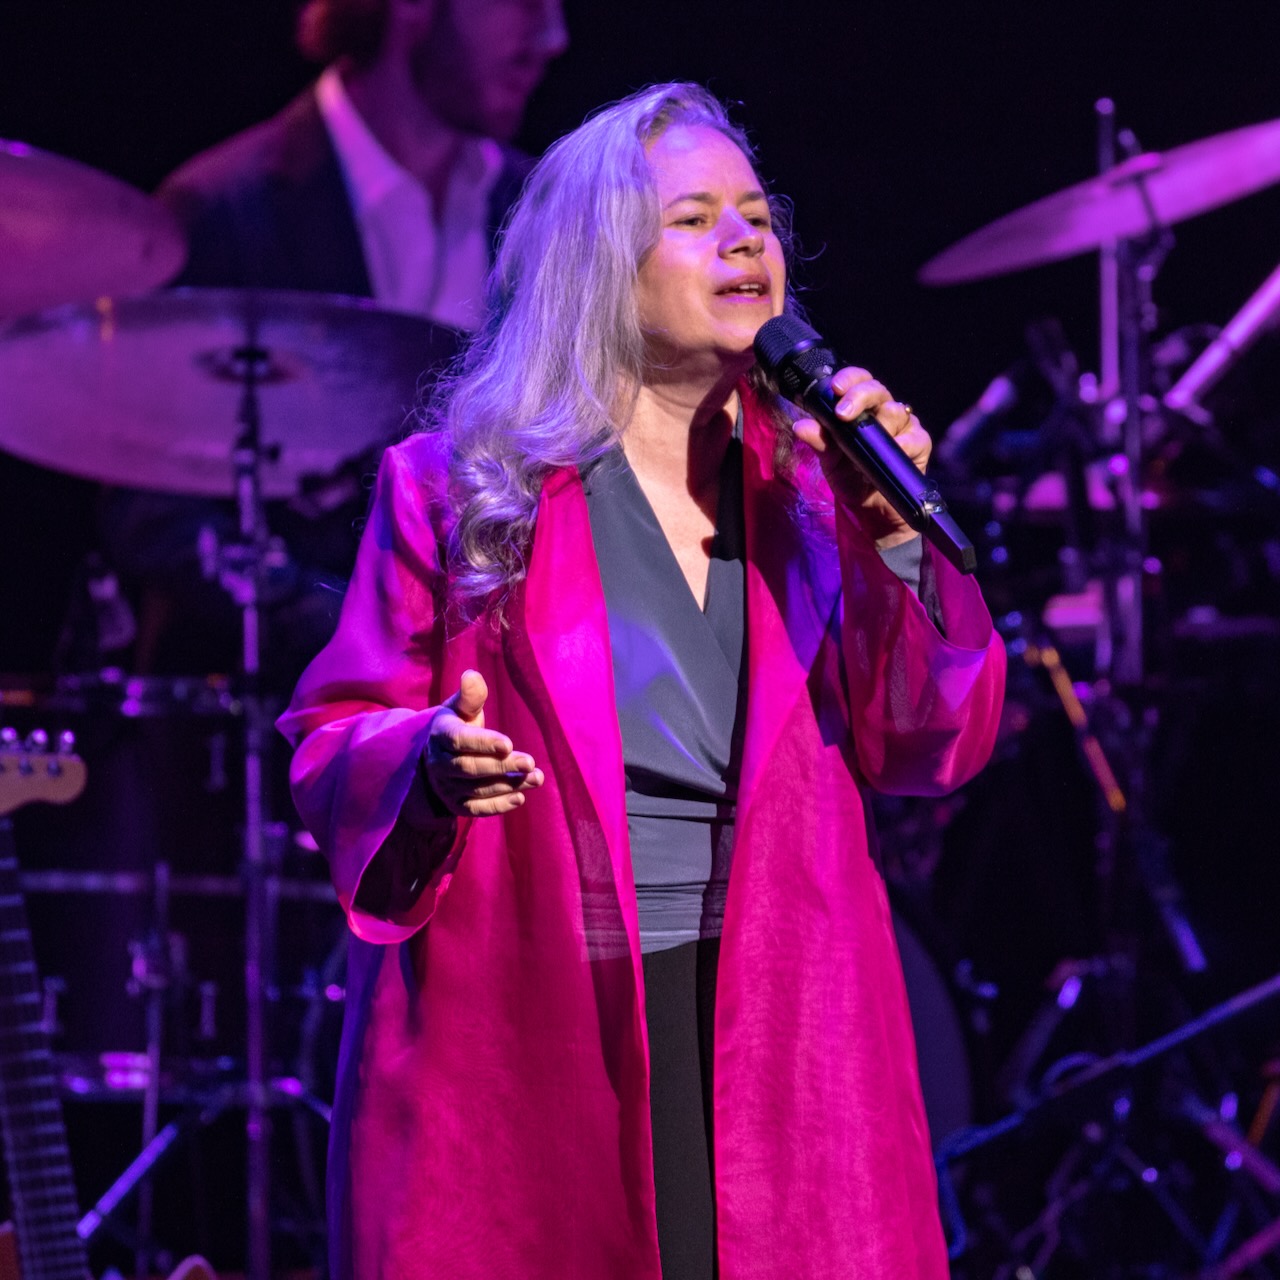 Hosts With the Most: Del McCoury, Jim Lauderdale Team Up for 2019 IBMA Awards